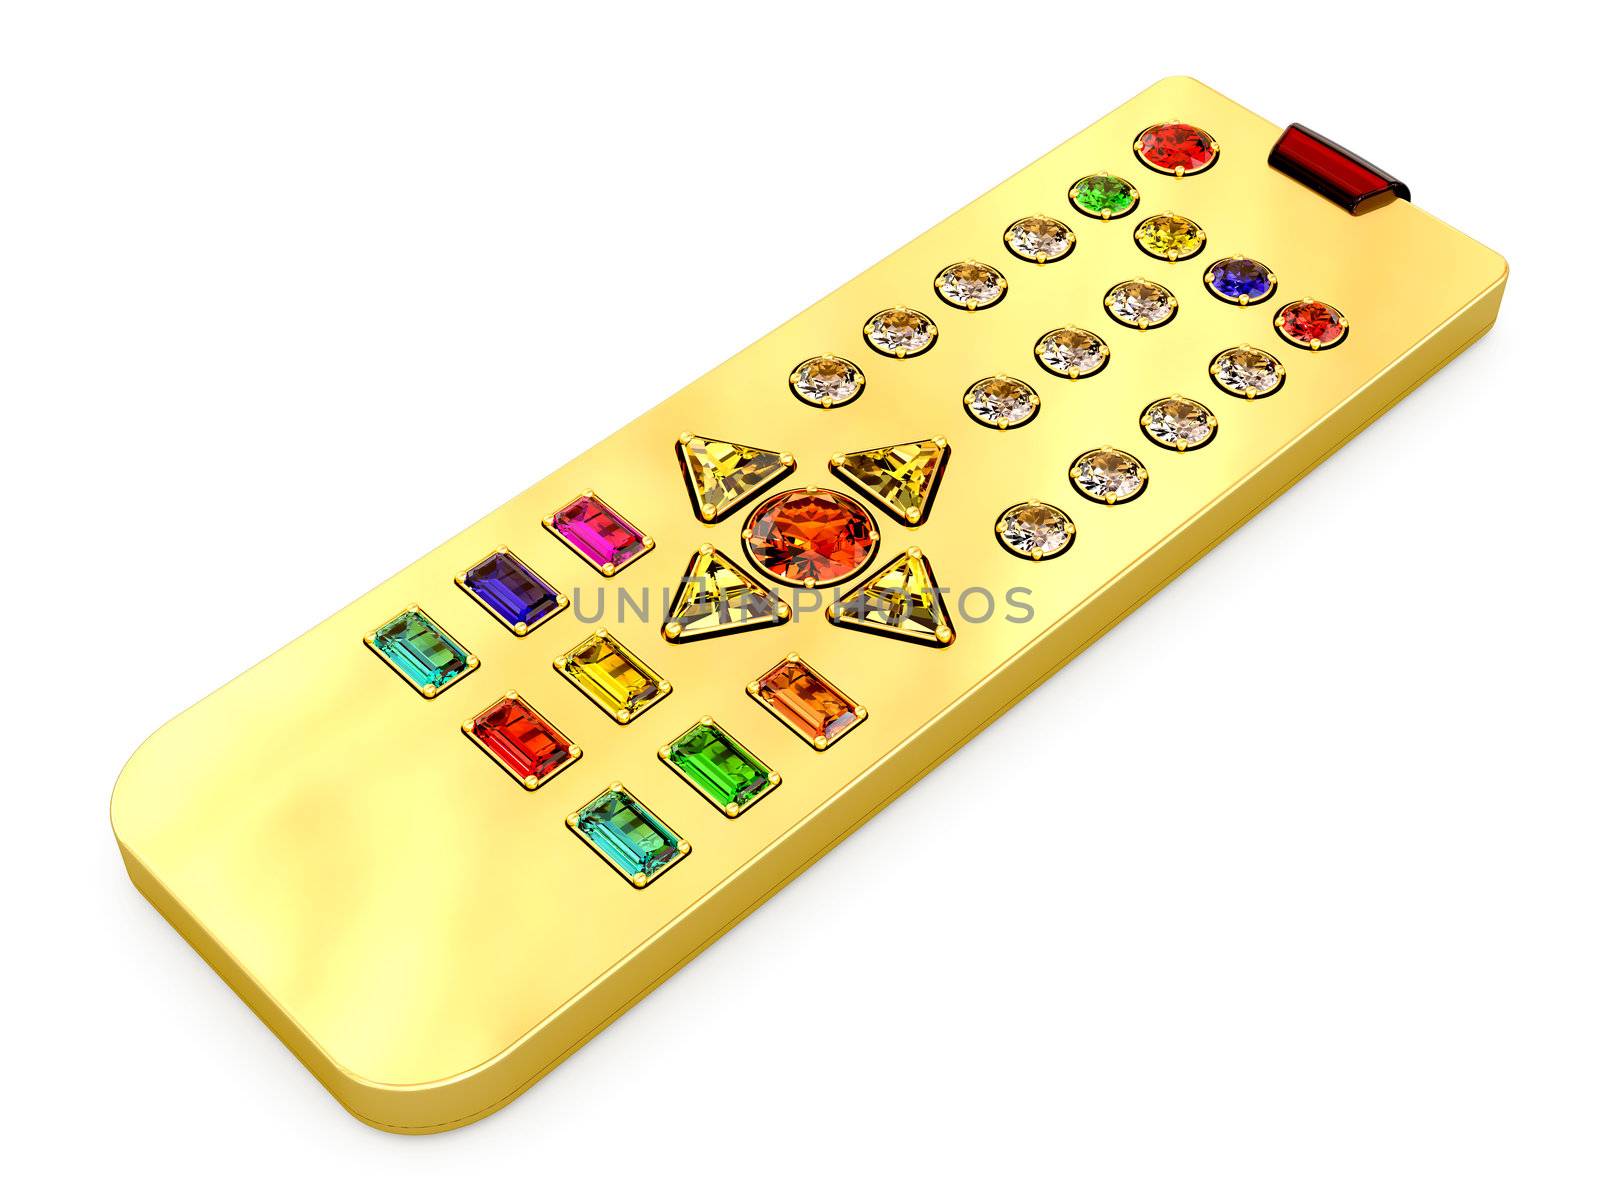 Golden universal remote control with colorful gems buttons on white. High resolution 3D image
